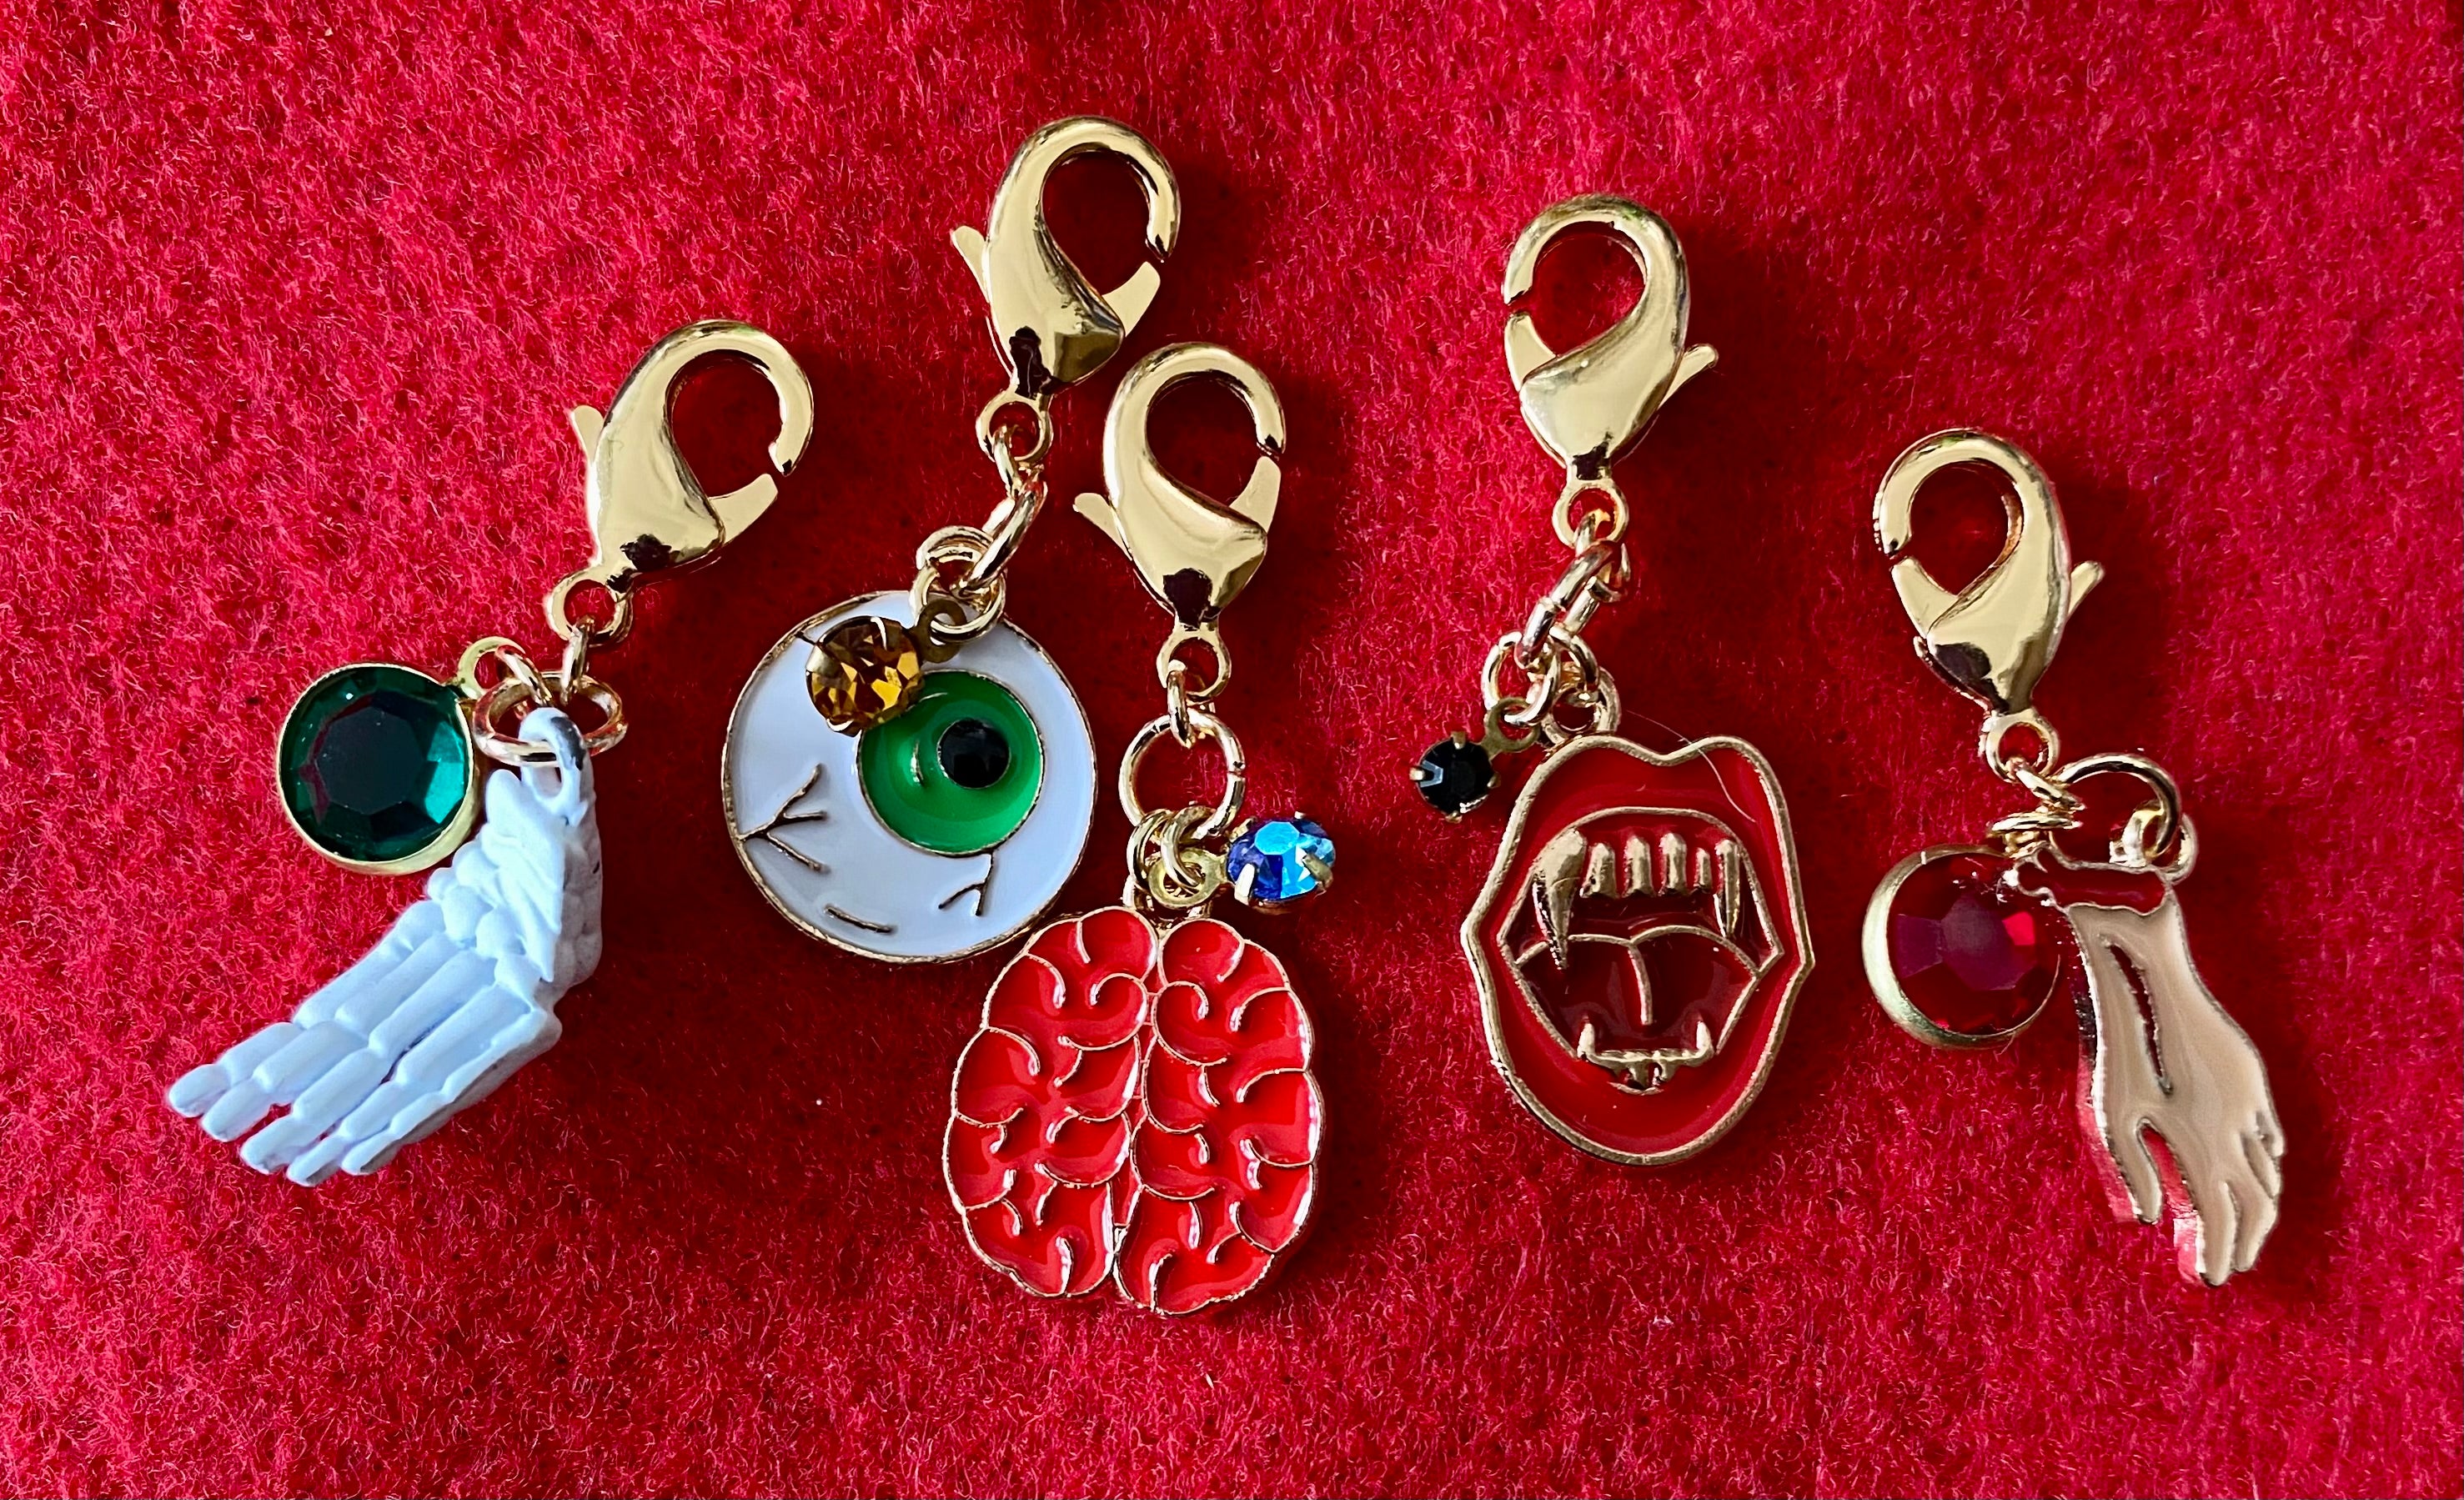 “Body Parts” Yucky Set of 5 Halloween Themed Stitch Markers